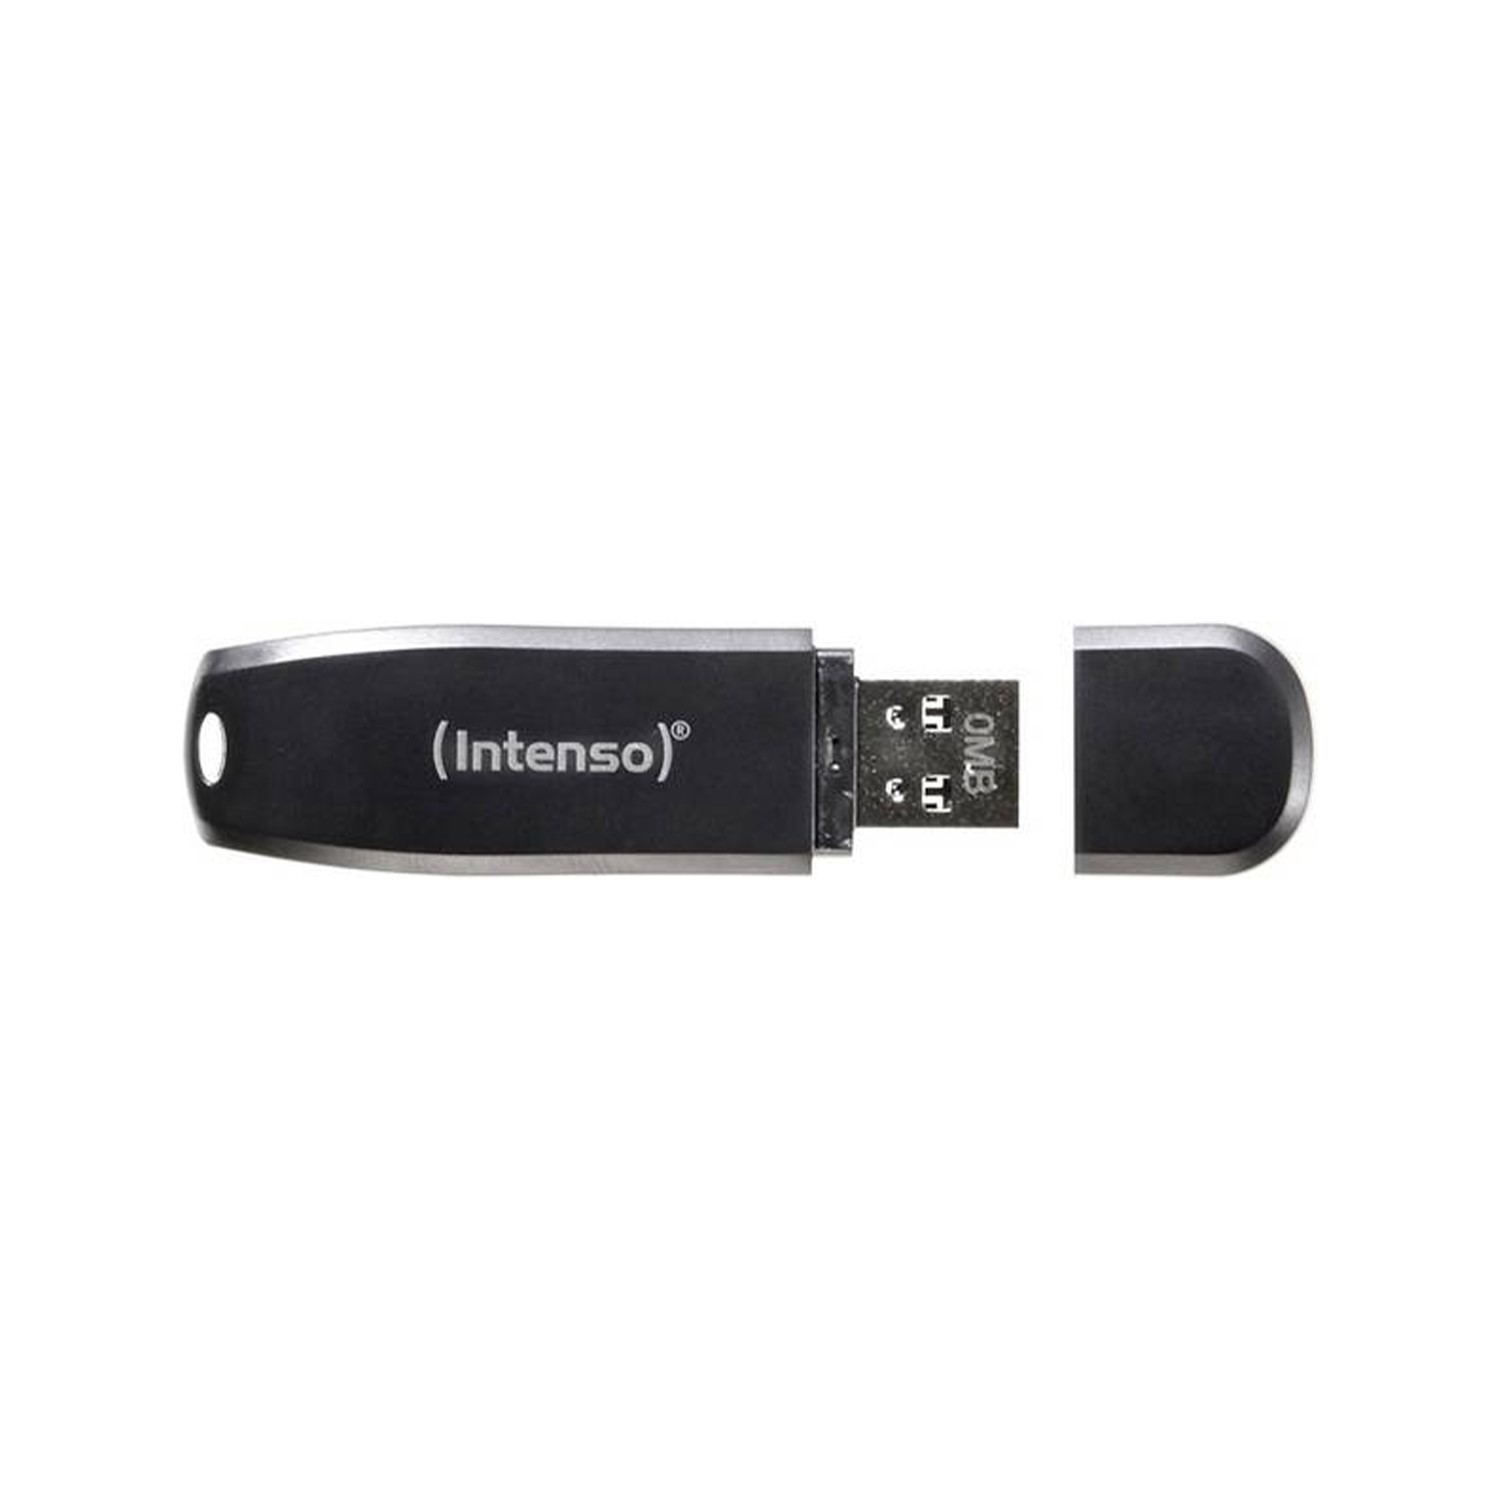 2.0 High Speed USB Drive. Intenso Intenso Business Line 8 GB 